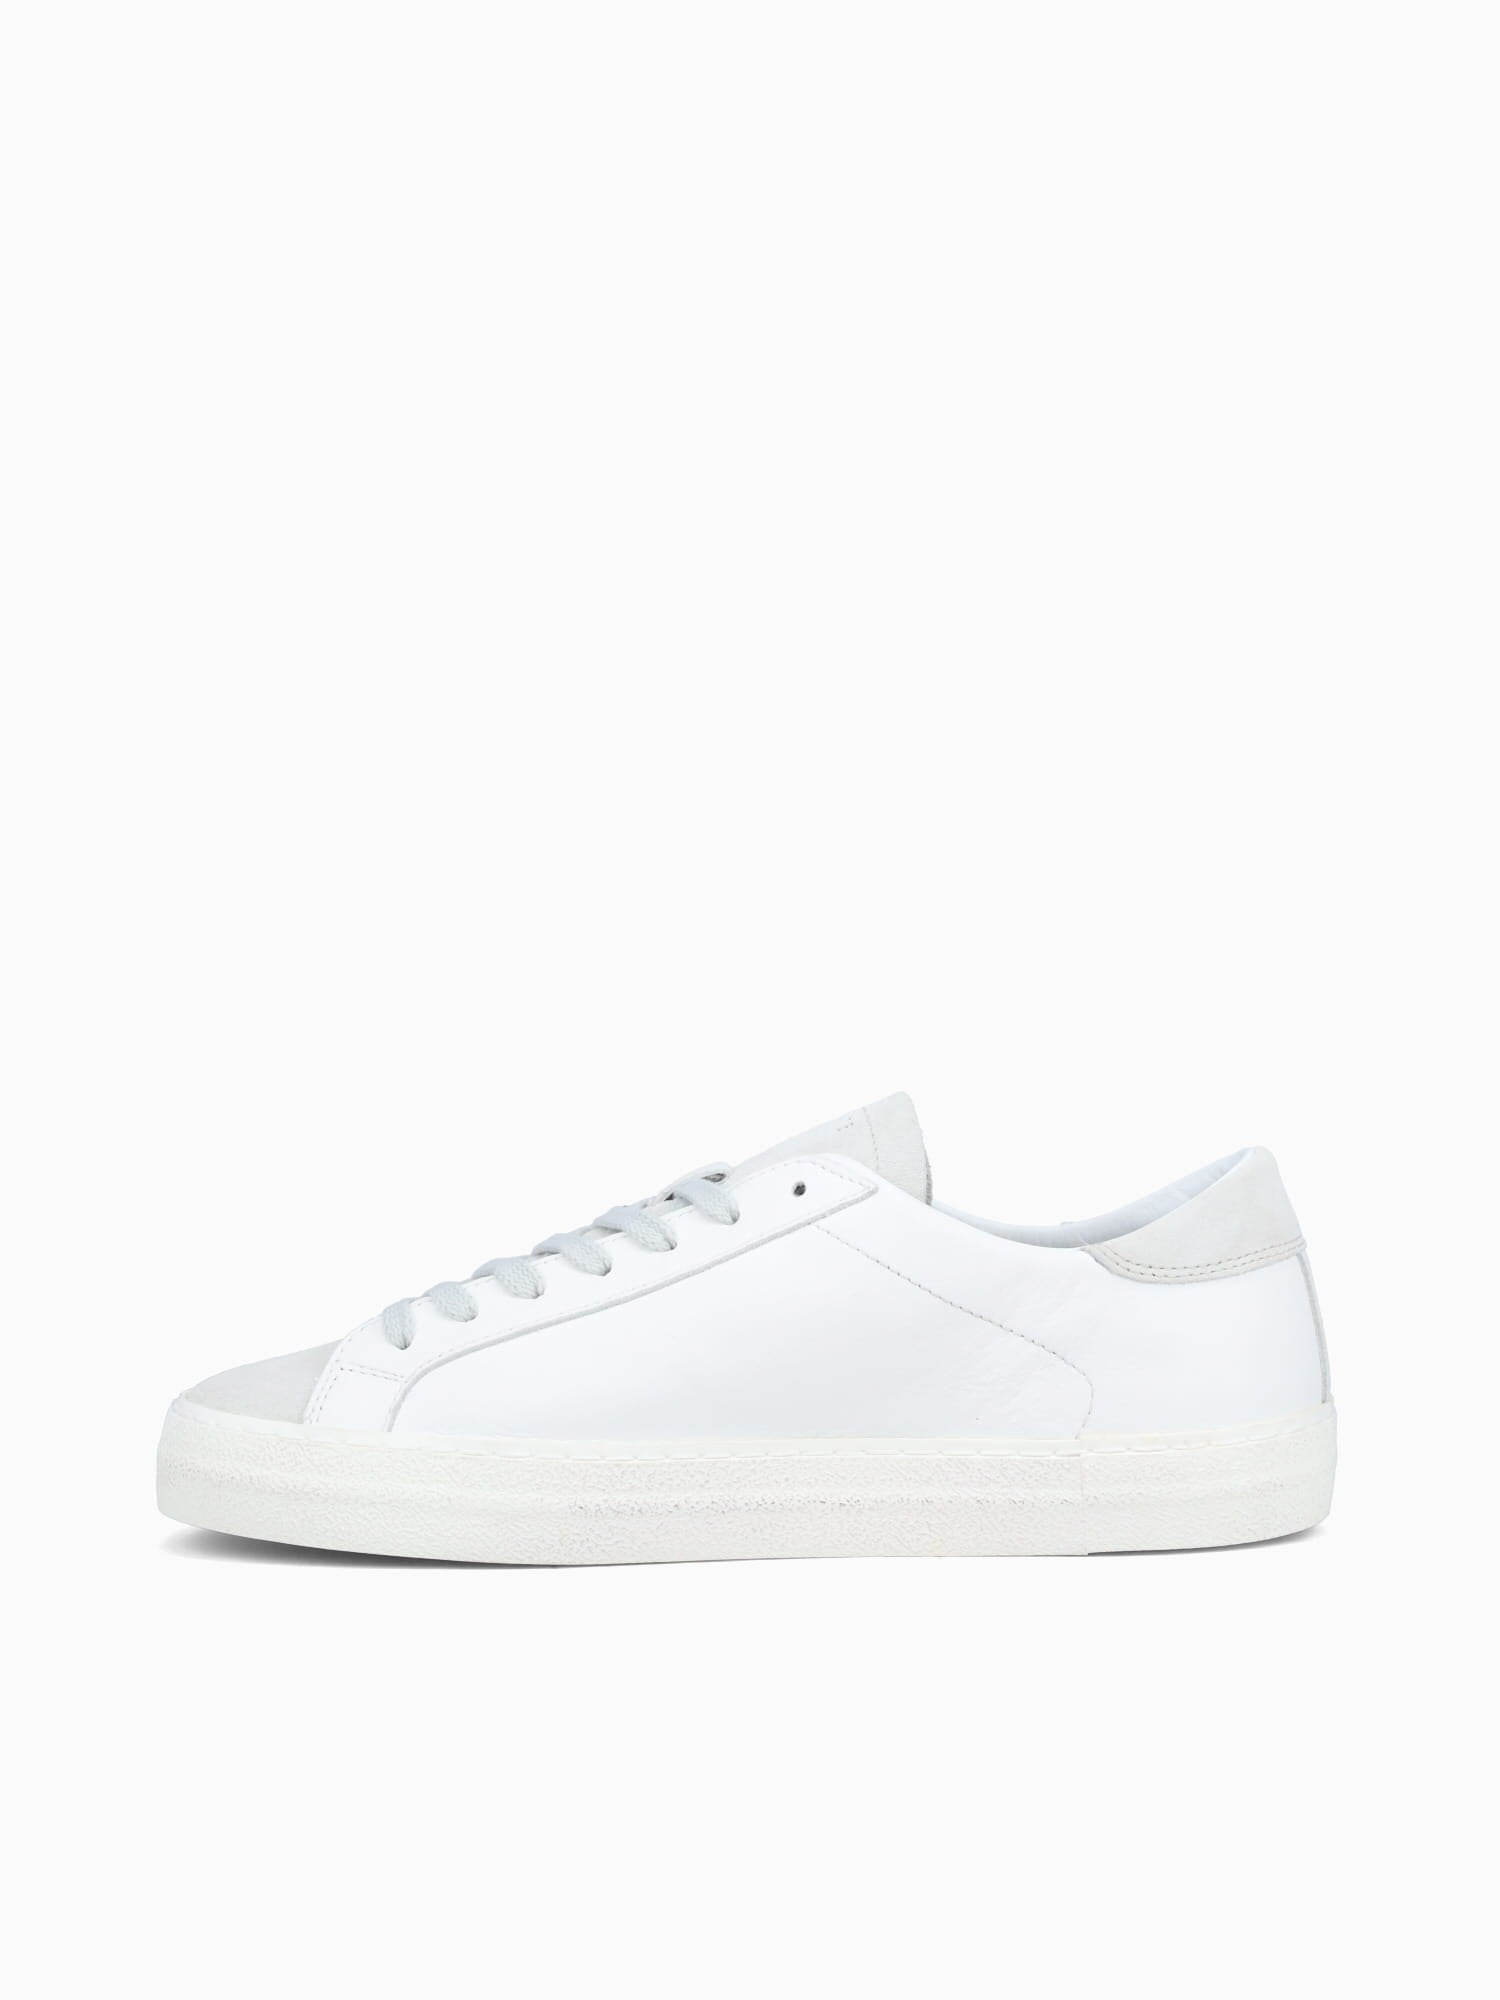 Hill Low White Leather White / 40 / M